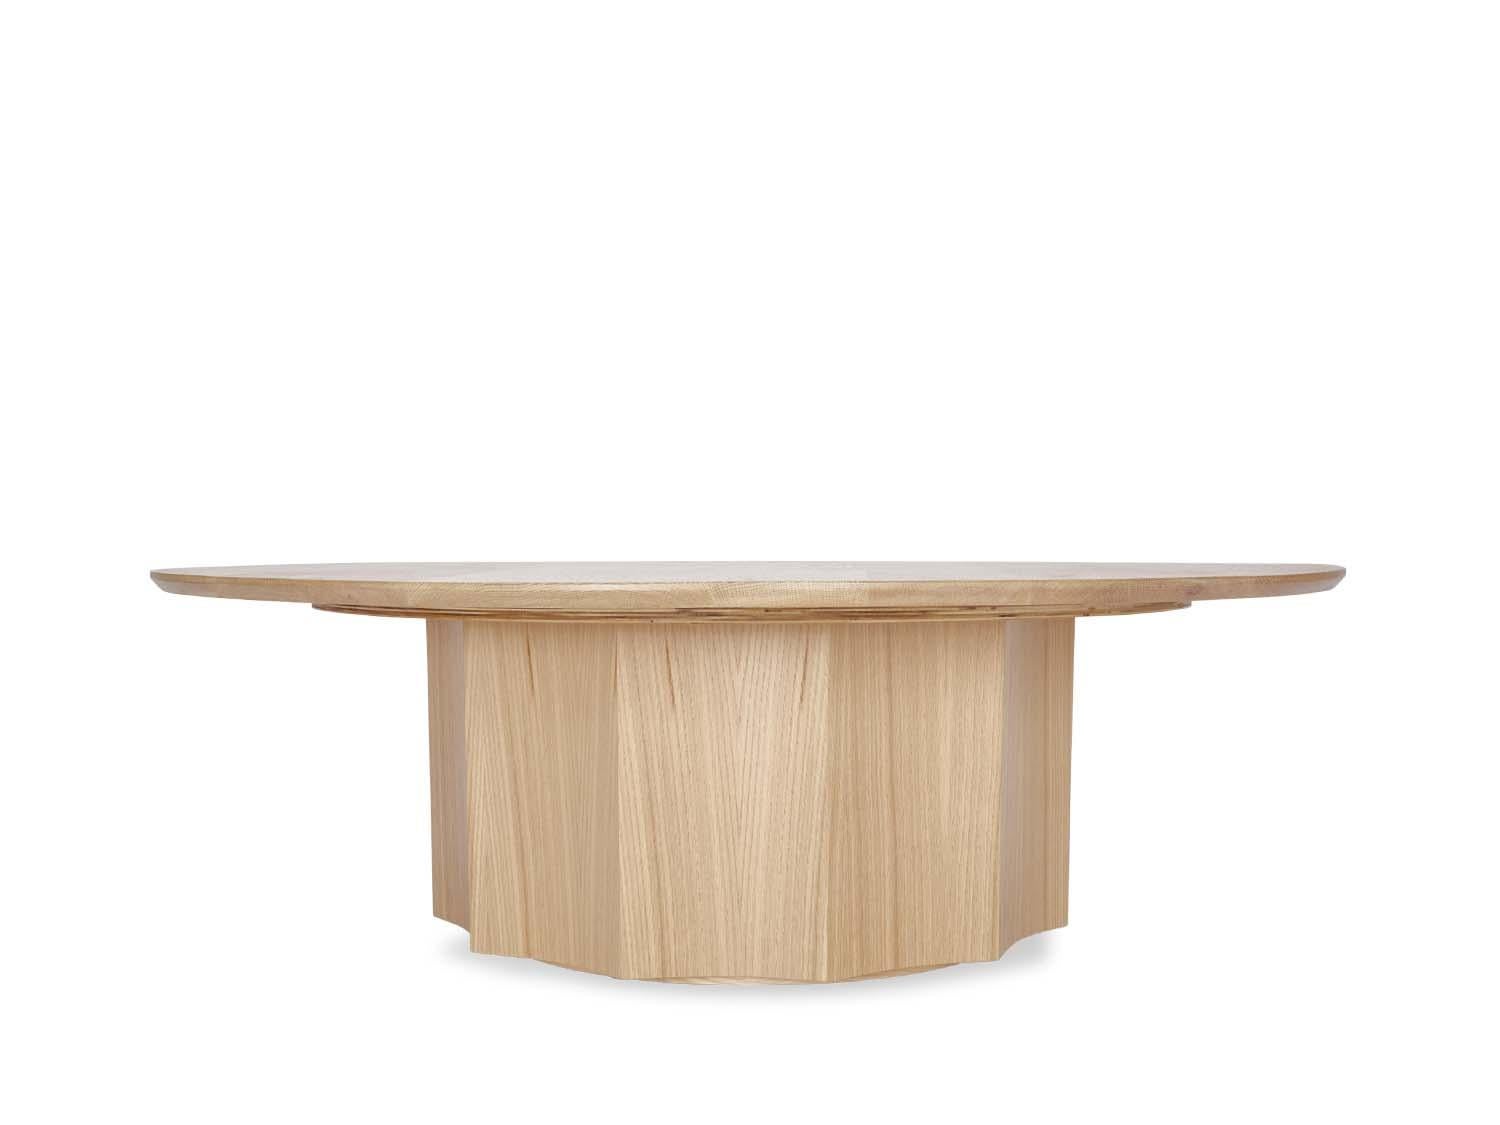 The Normandie cocktail table with wood top is a variation of our stone top Normandie Cocktail table. It features an American walnut or white oak fluted base with a sturdy wood top. Available in three sizes. 

 The Lawson-Fenning collection is